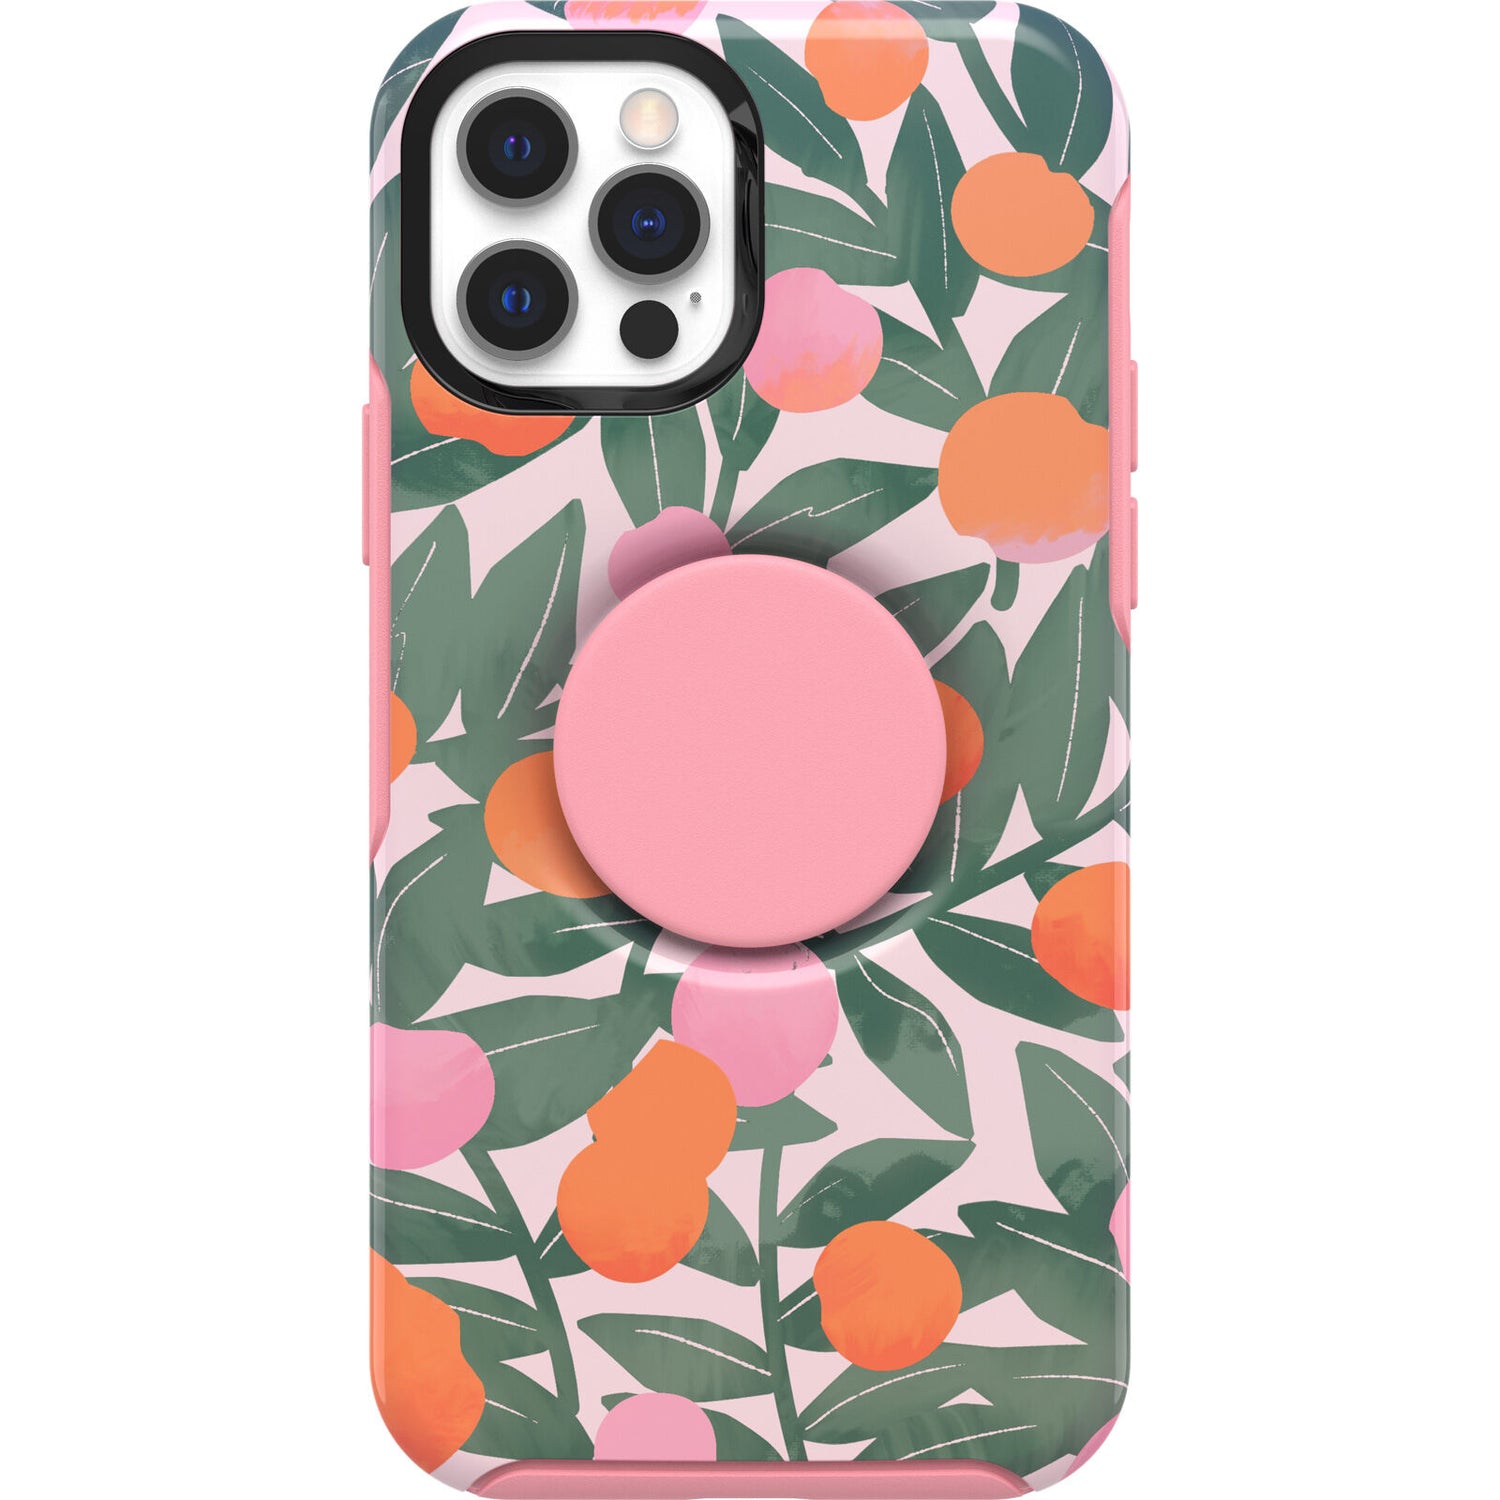 OtterBox + POP SYMMETRY SERIES Case for iPhone 11/XR - Stay Peachy (New)